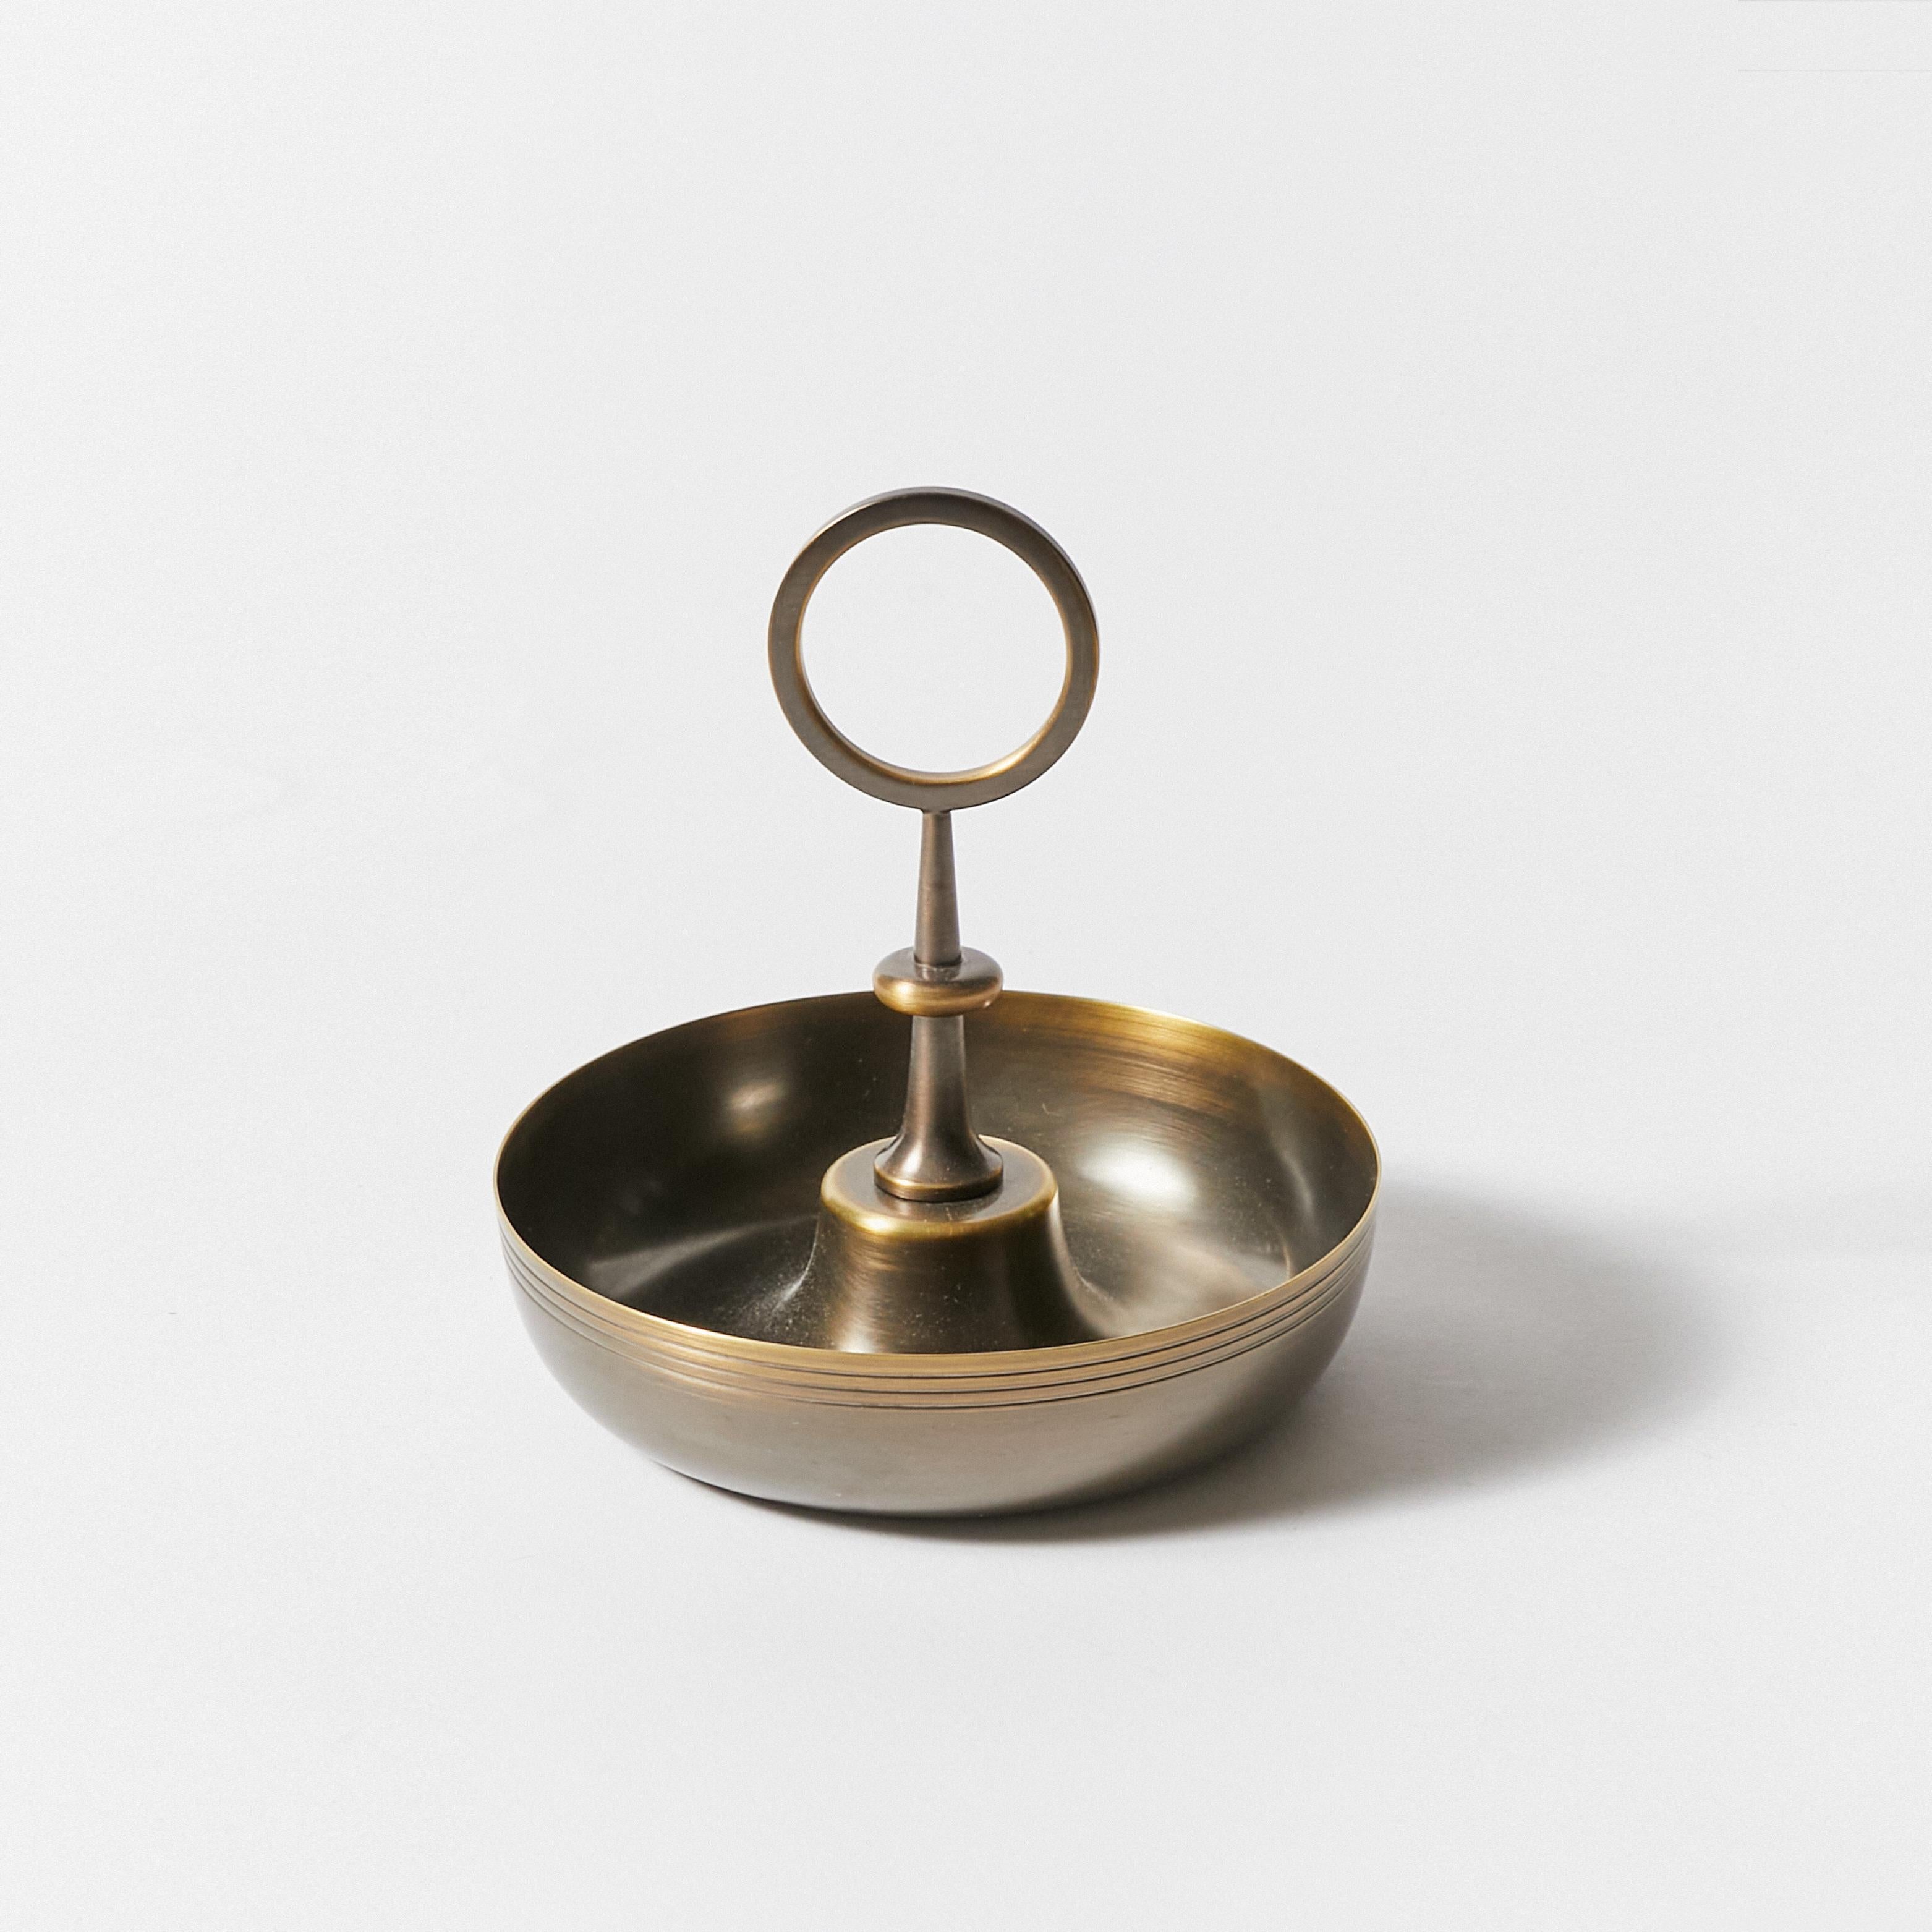 Small serving bowl designed by Tommi Parzinger for Dorlyn-Silversmiths. Re-finished in antique bronze. Signature stamp on bottom.